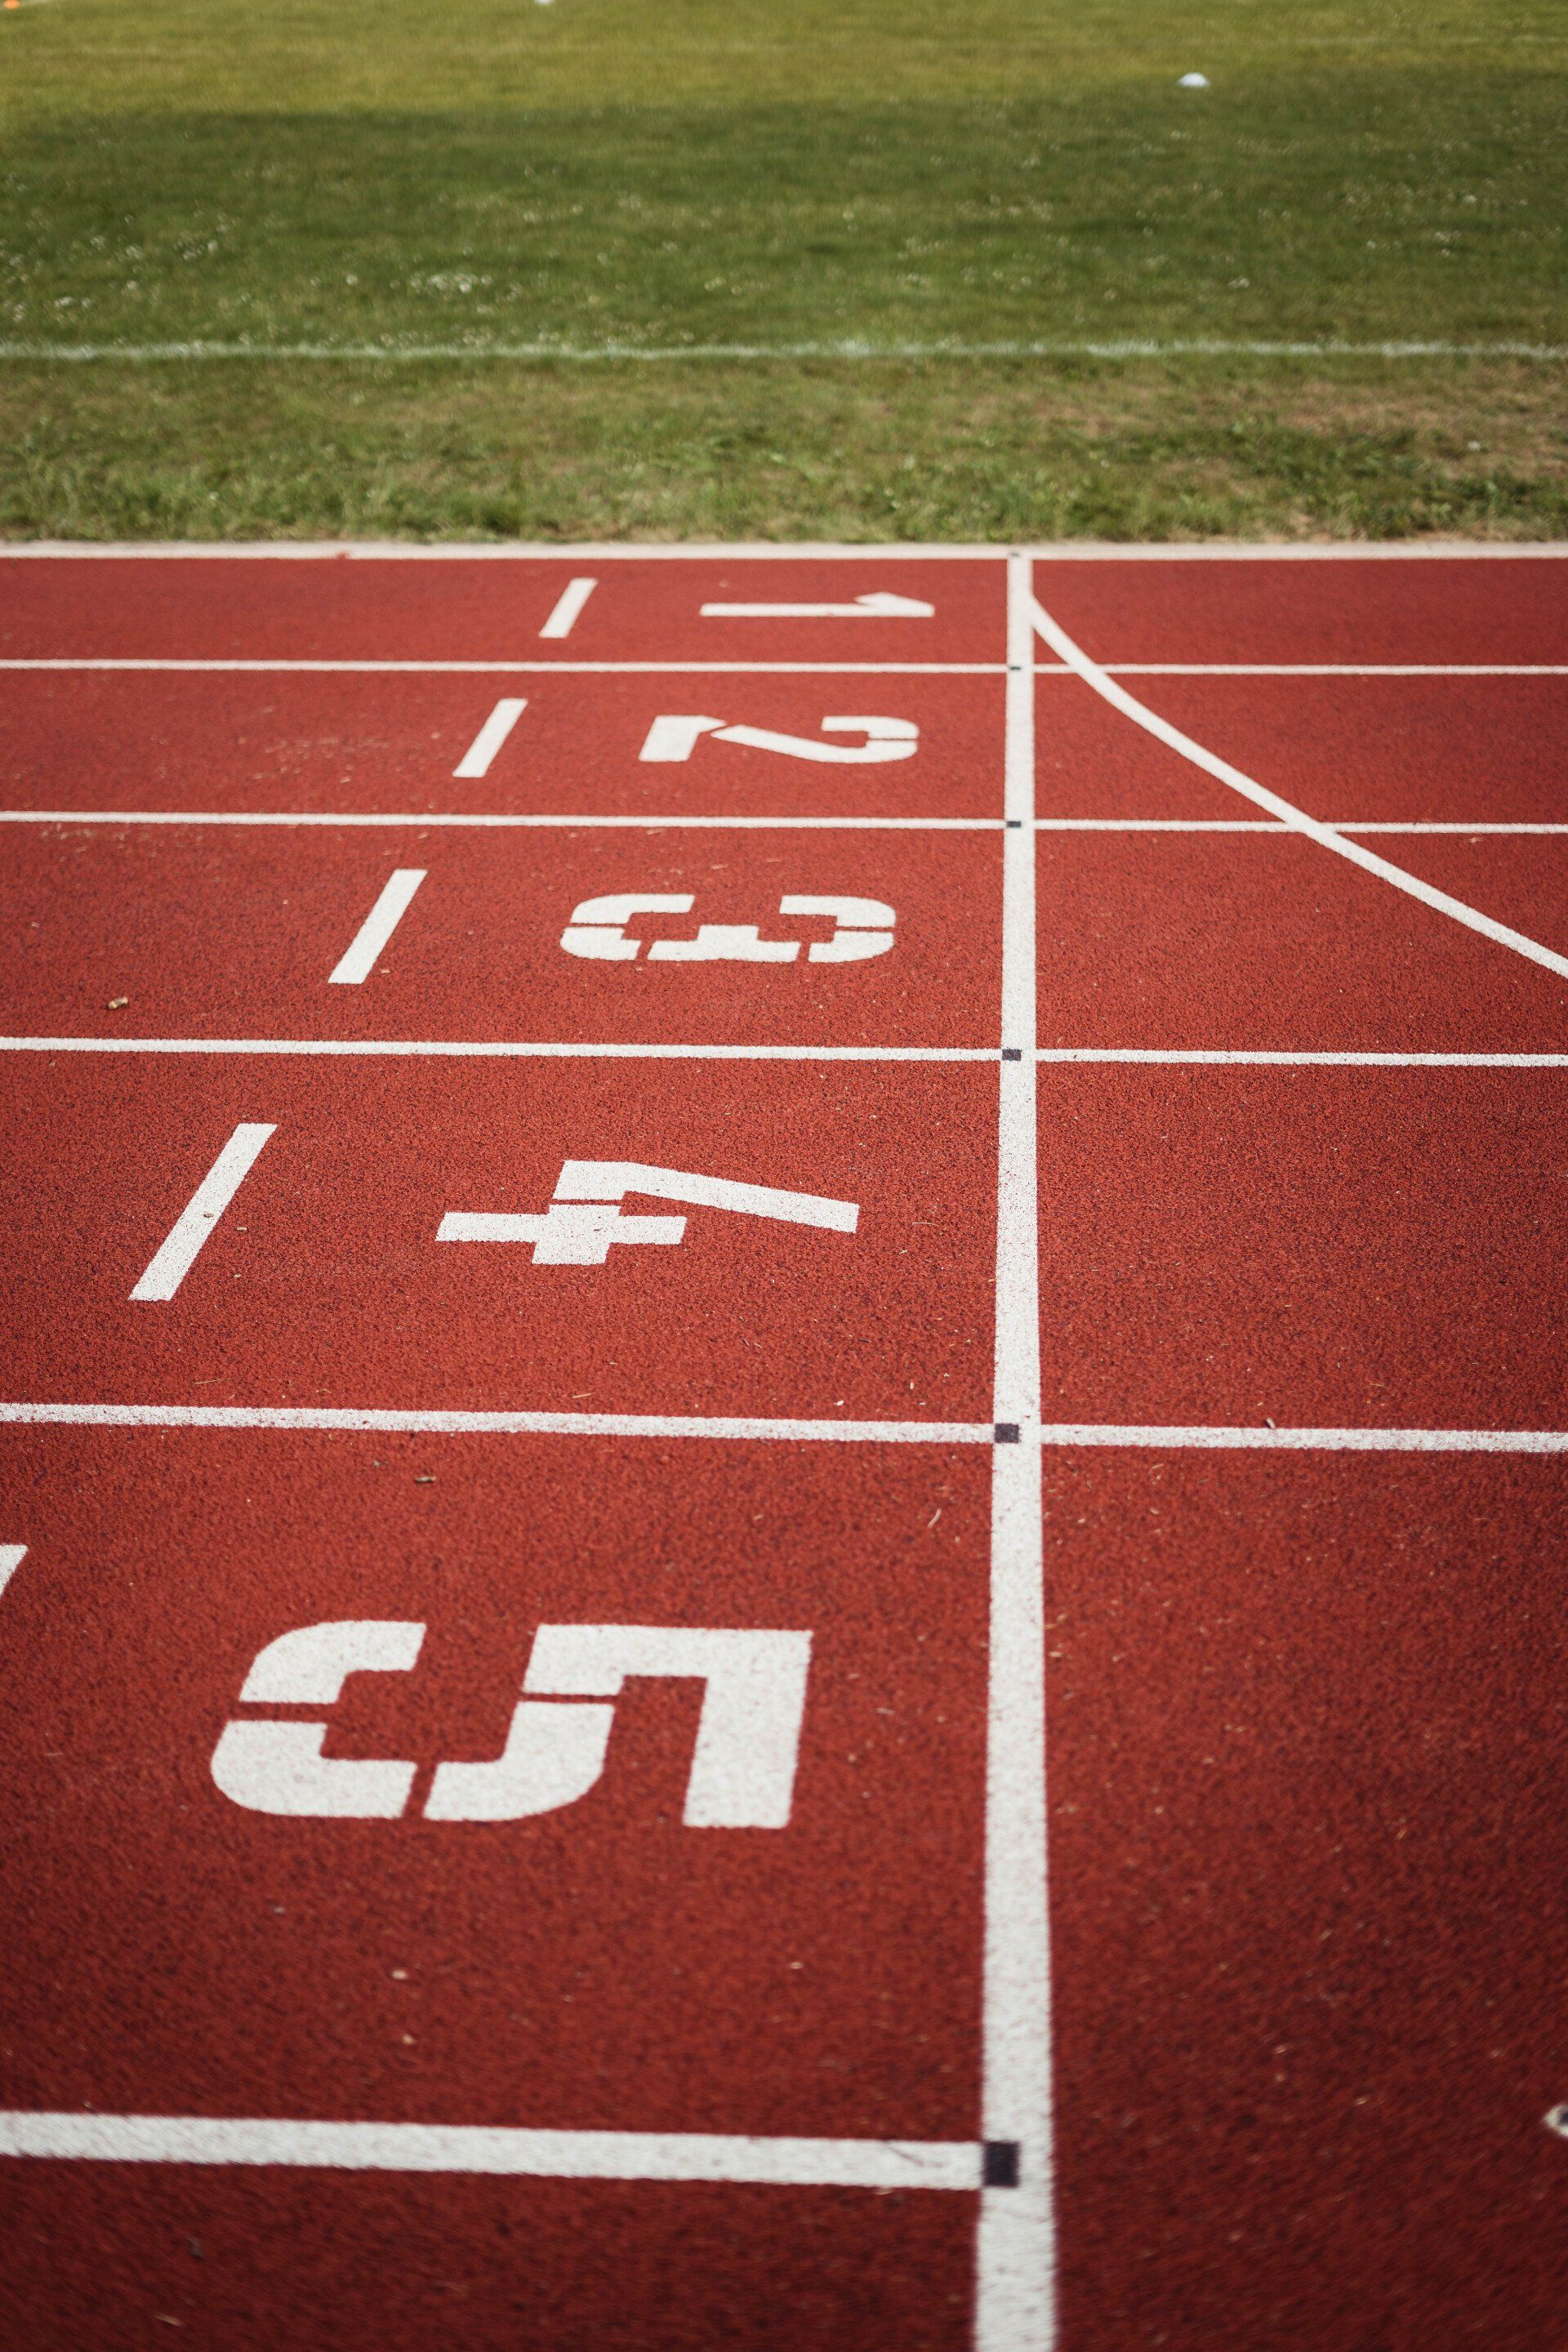 A running track with the numbers 1 through 5 painted on it